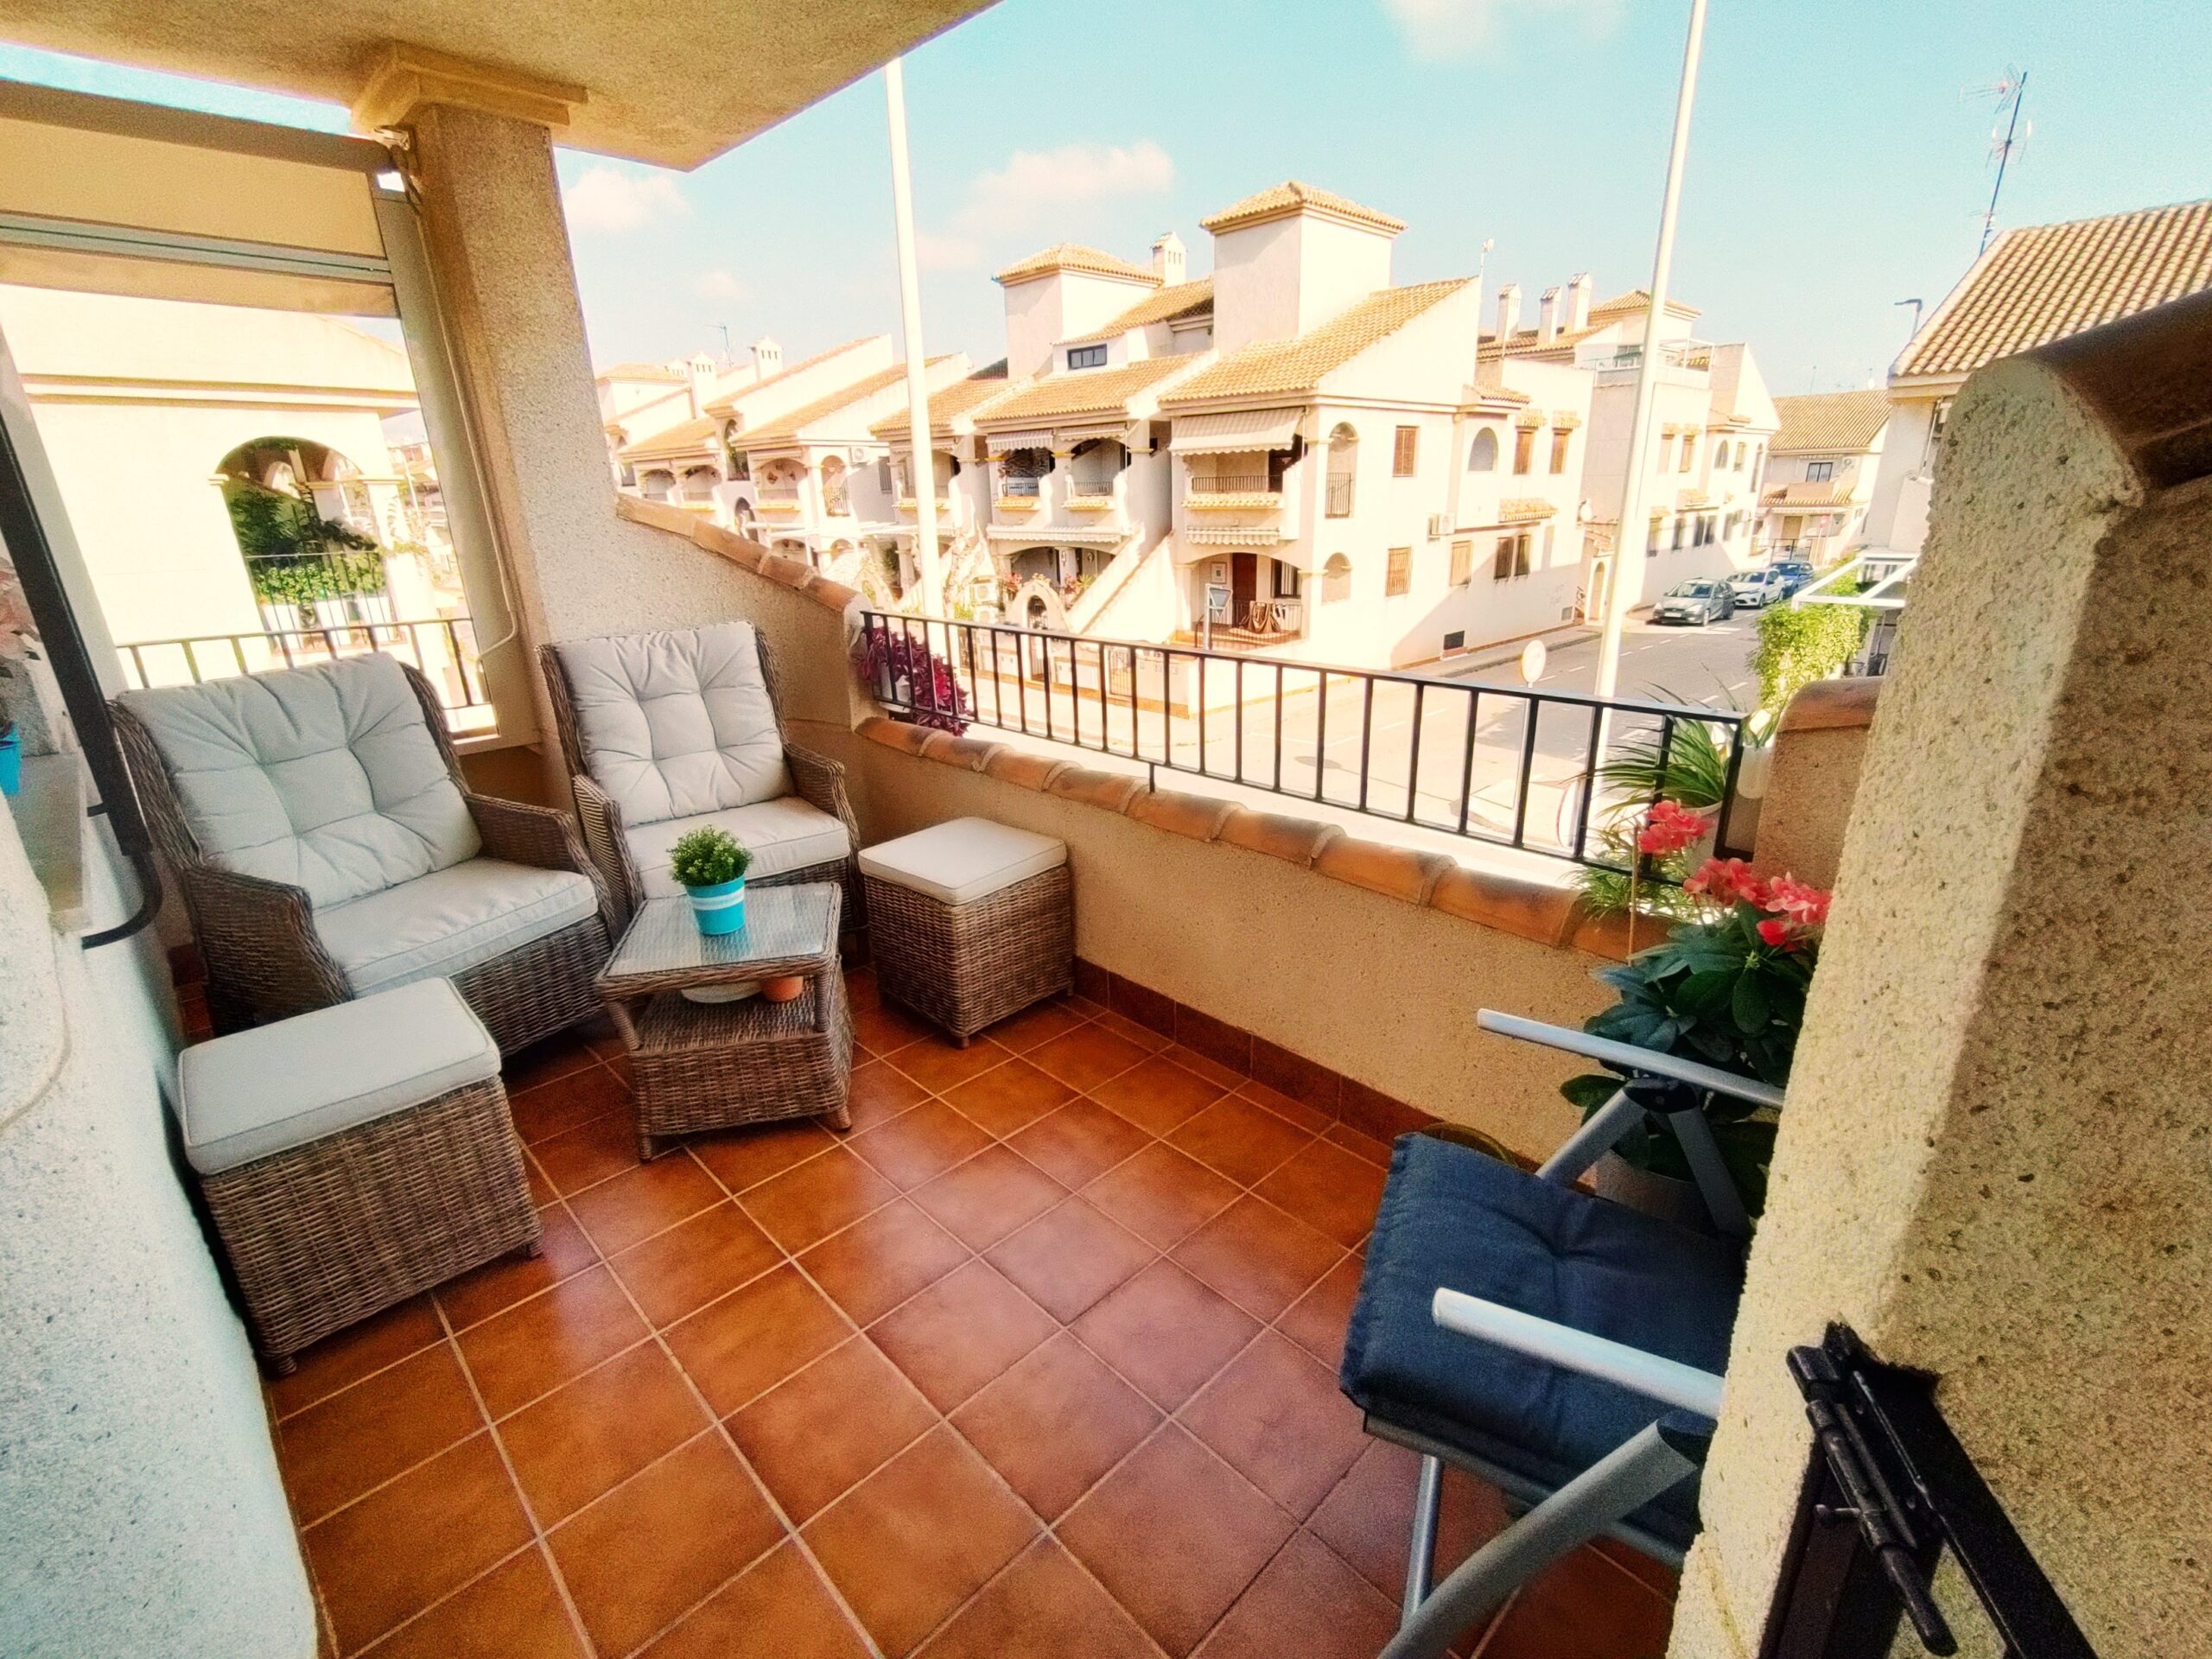 For Sale – 3 bedroom 2 bathroom Penthouse close to beach